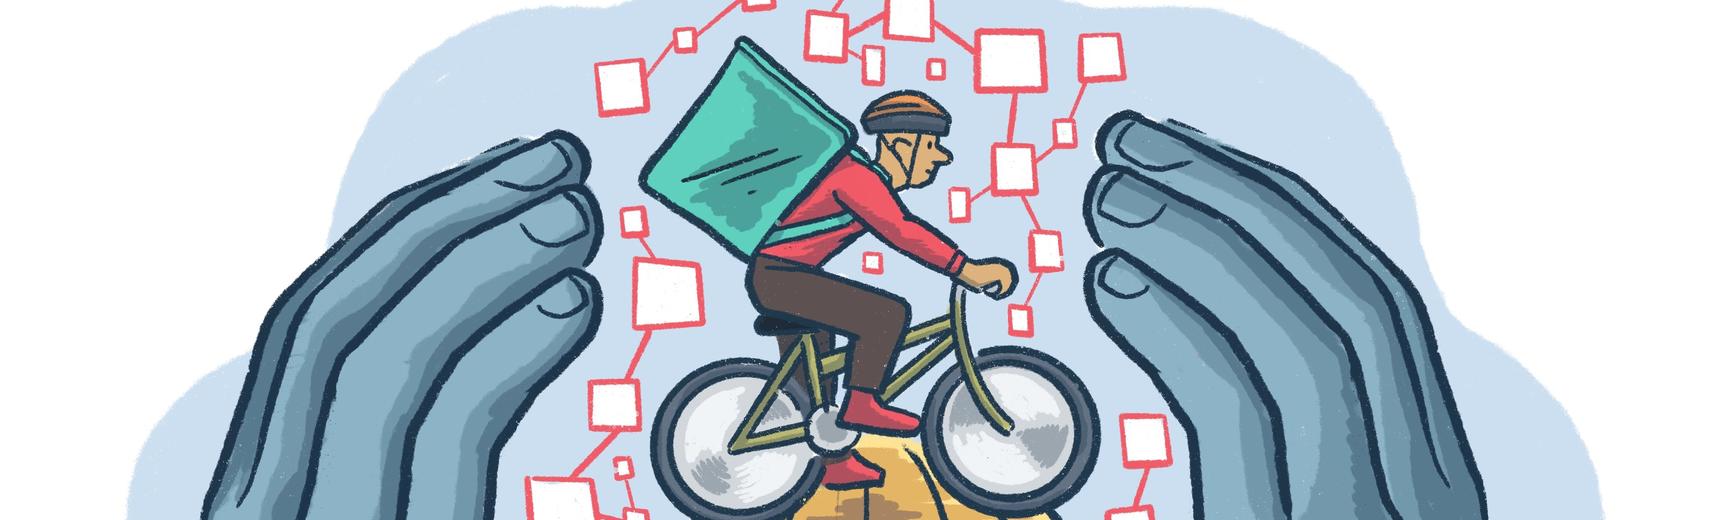 Illustration of a delivery man on a bicycle carrying a delivery bag on his back. He is cycling around a globe, surrounded by lots of interconnected squares. Two large hands surround the entire image in a protective manner.